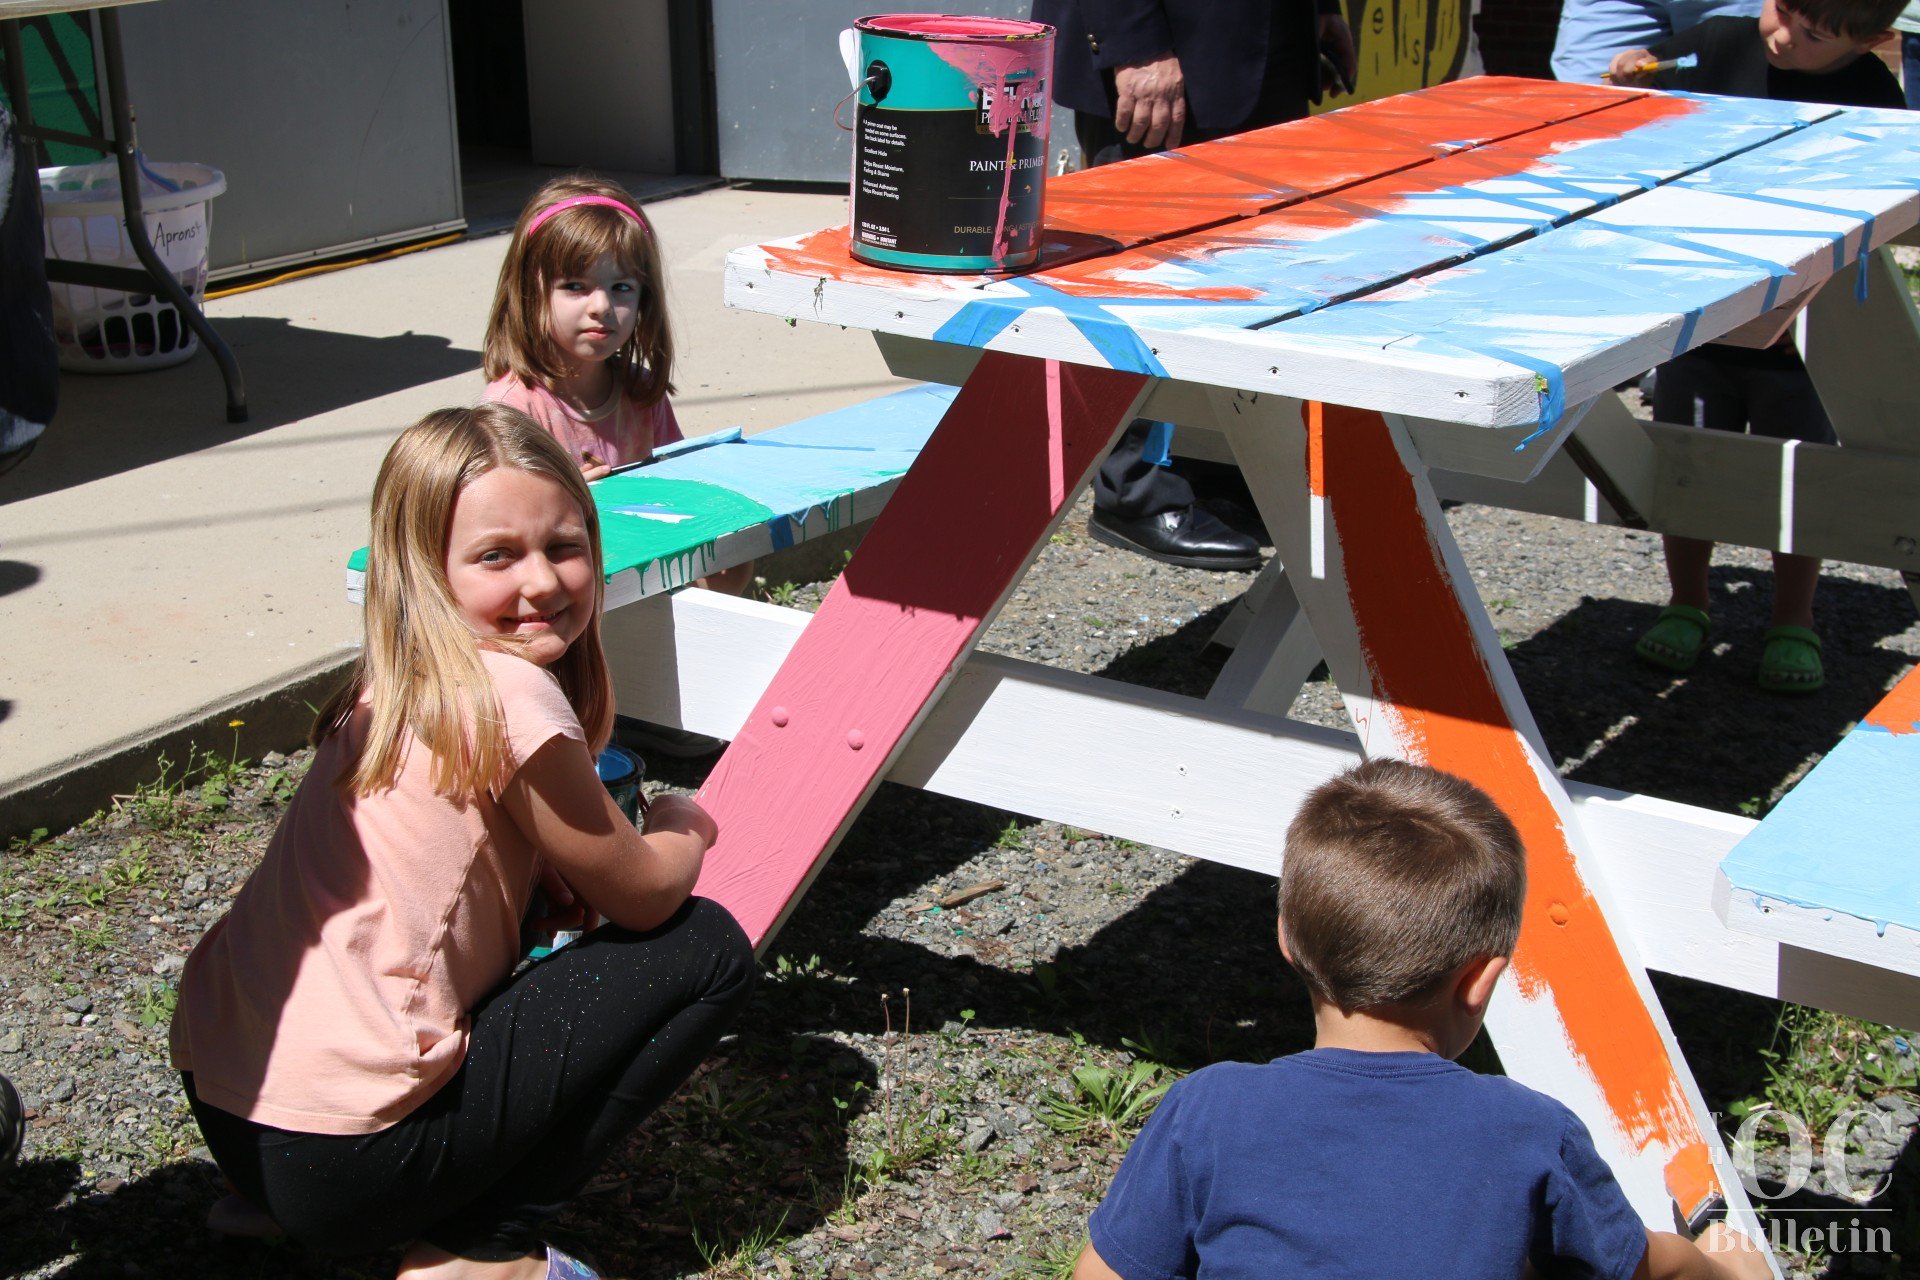  Kids and families had an opportunity to paint a section of the picnic tables located in the community garden. (Photo Credit: Andra Landi) 